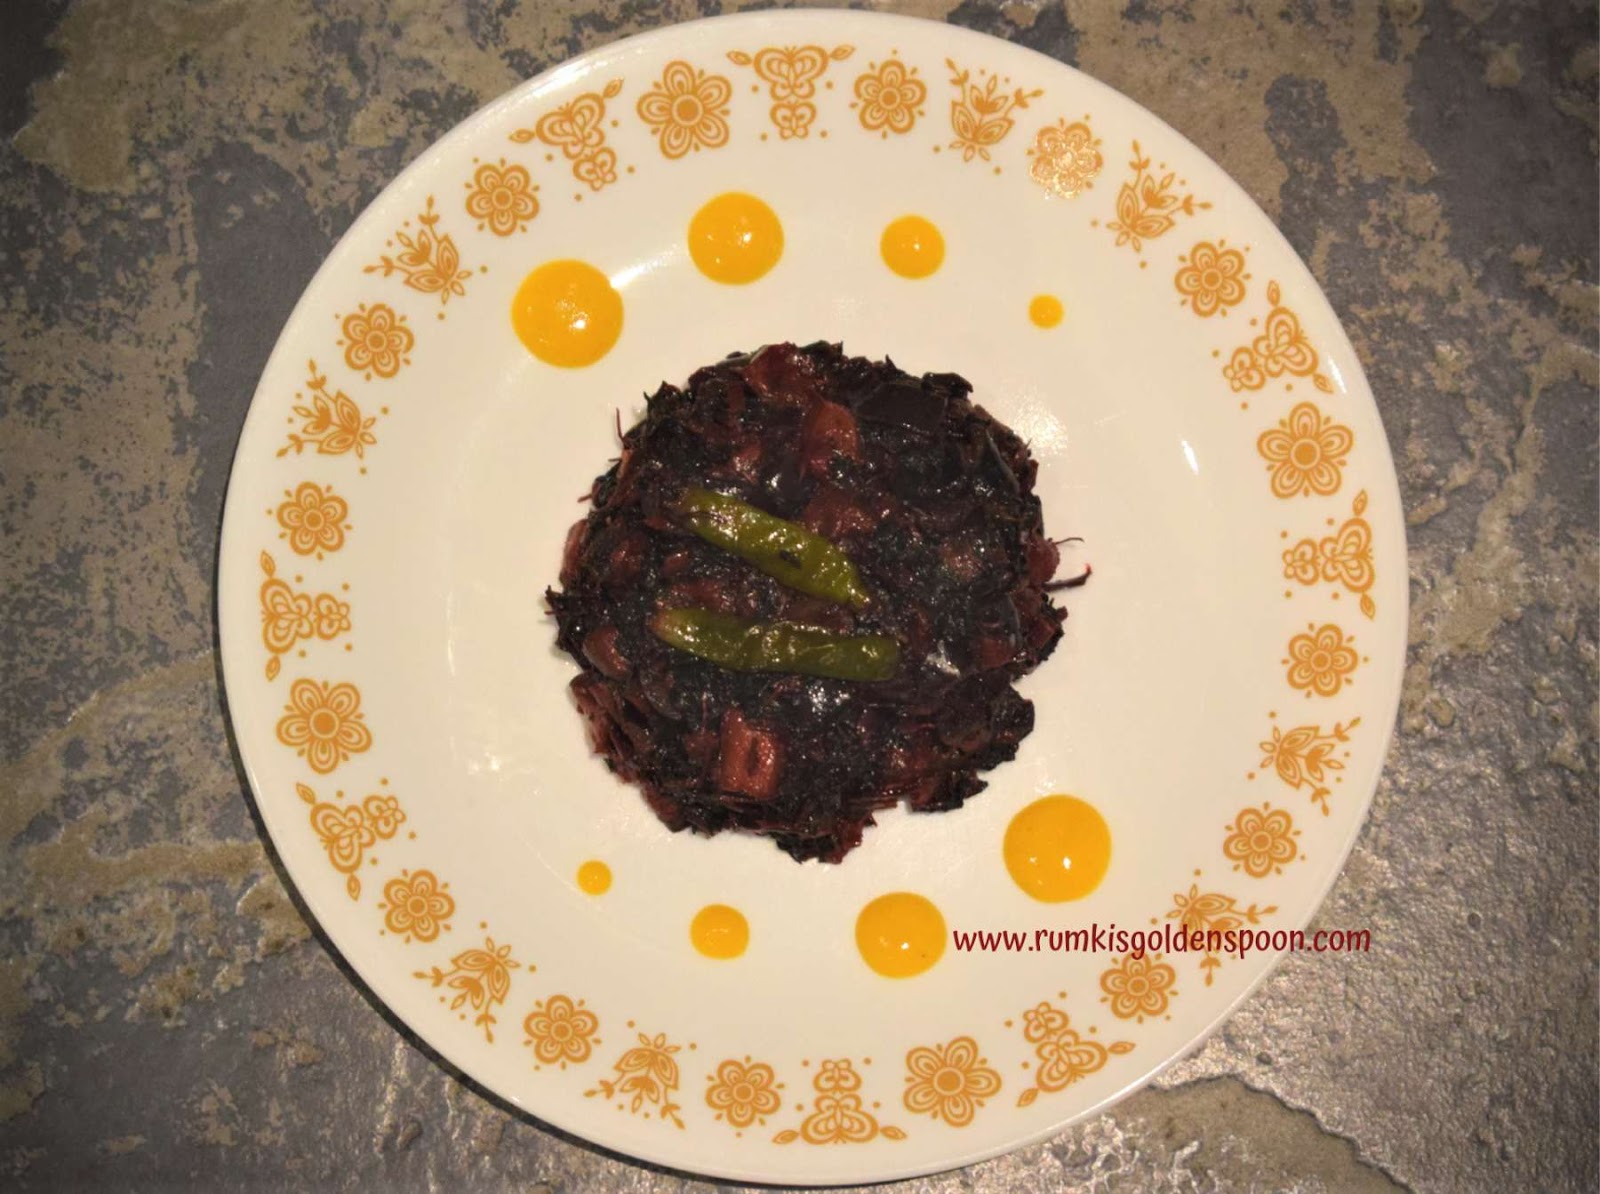 Indian Recipe, Bengali Recipe, Vegan, Vegetarian, Bengali Style Laal Saag (Red Spinach Dry Curry), Laal shaak, amarnath leaves dry curry, laal palak dry curry, Rumki's Golden Spoon